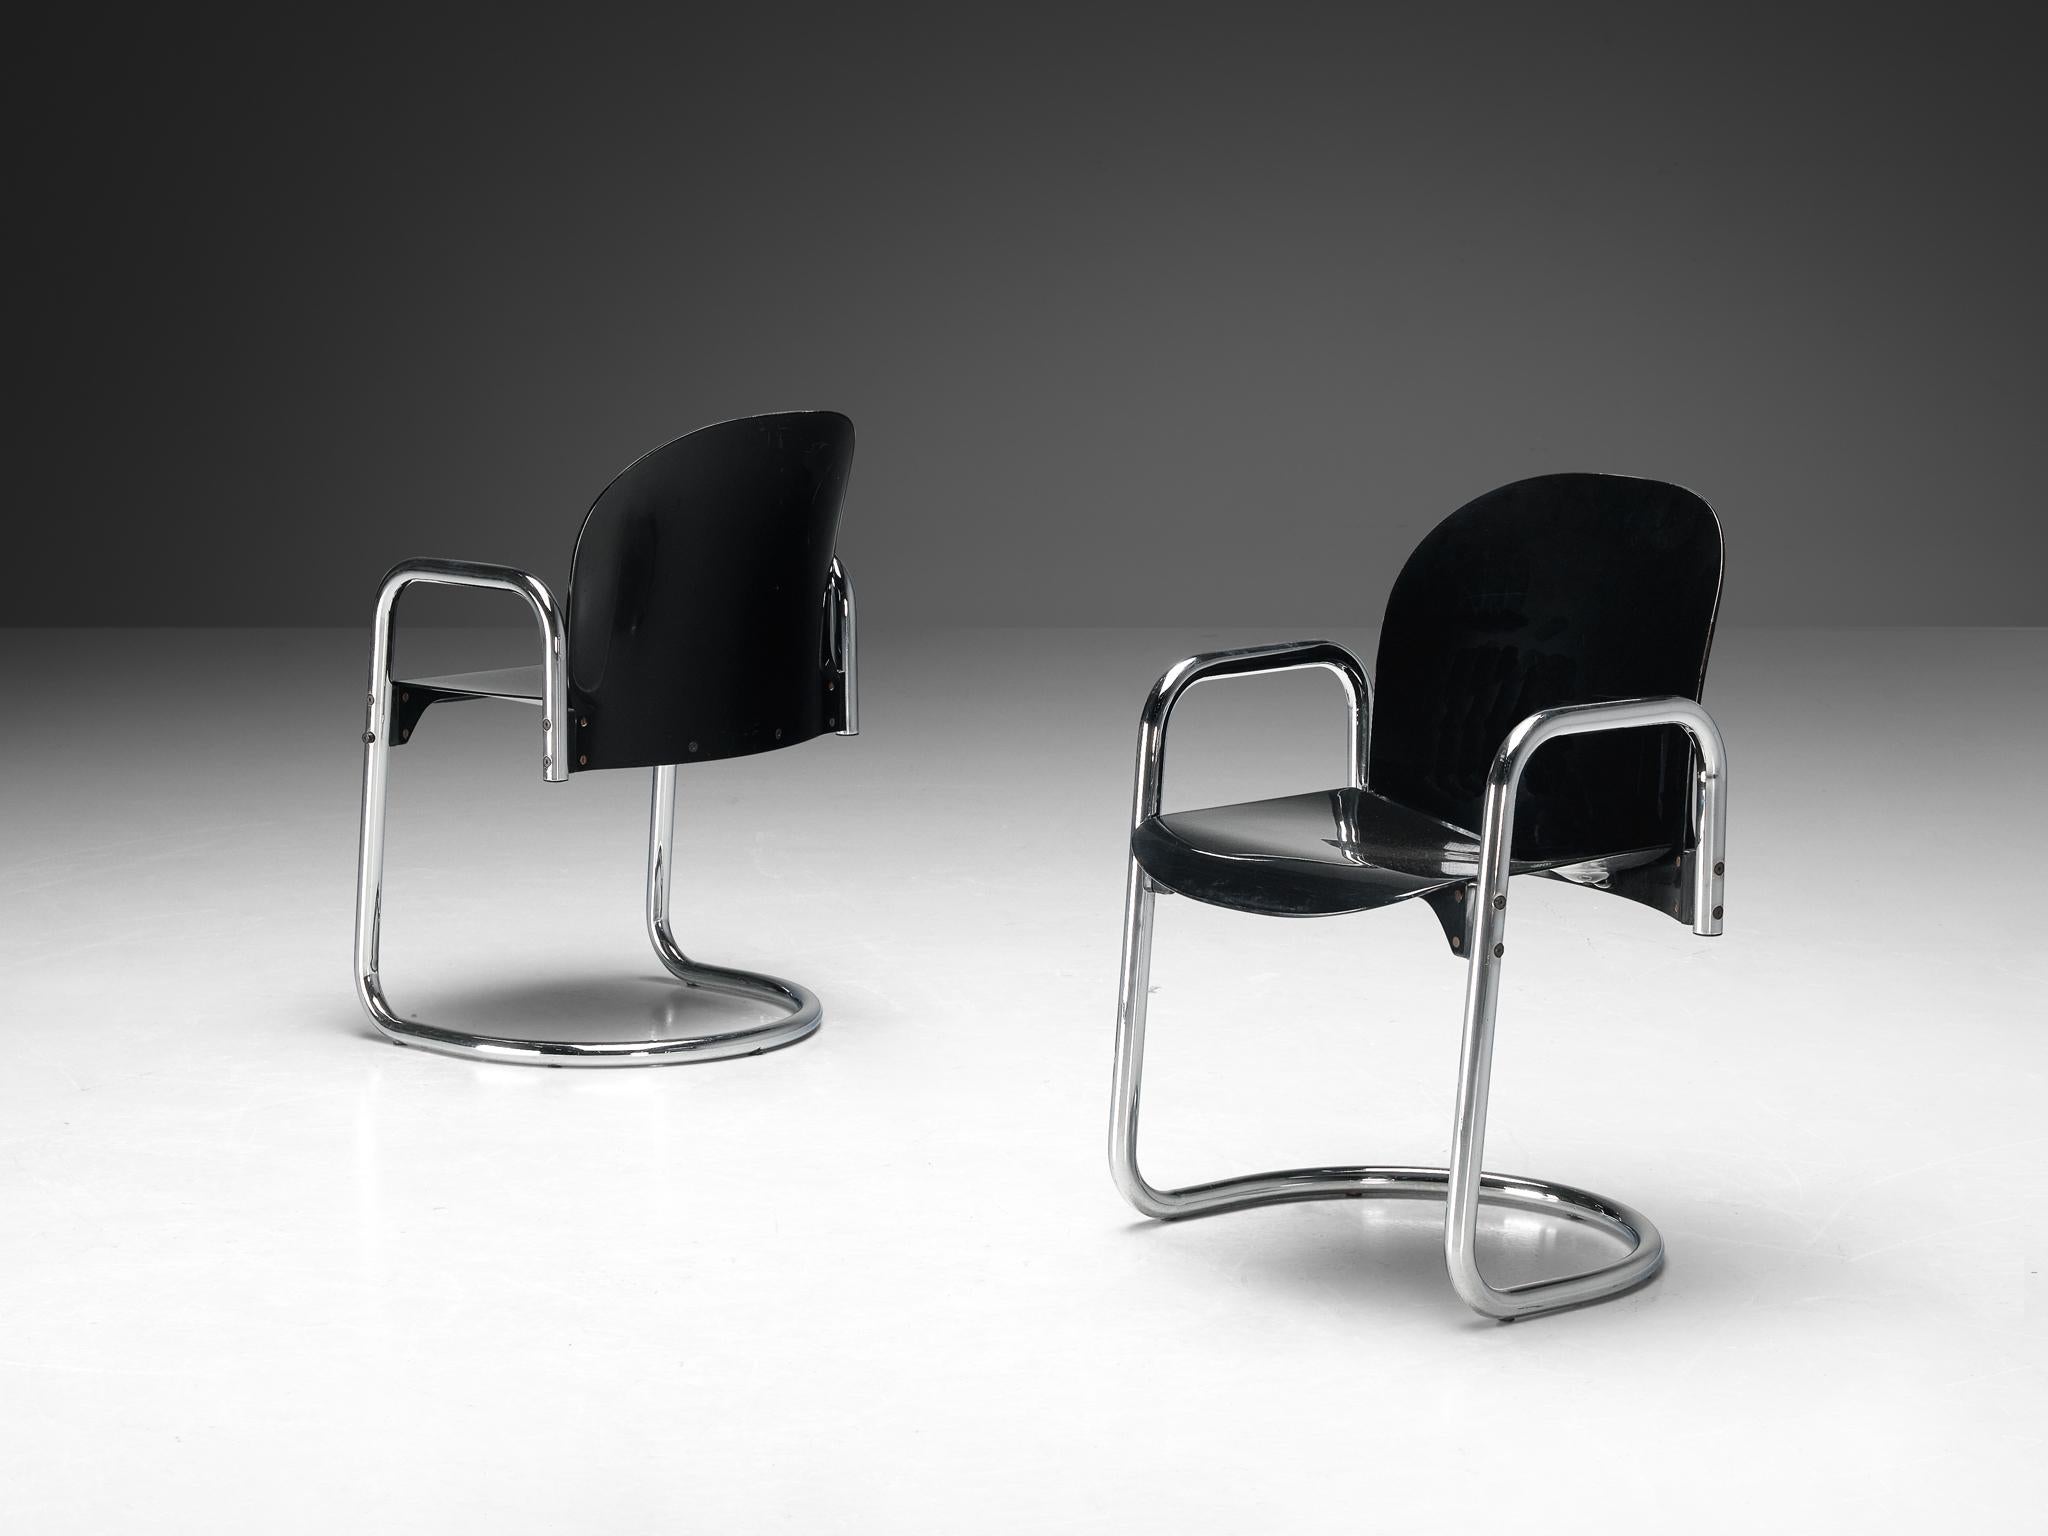 Afra and Tobia Scarpa for B&B Italia, 'Dialogo Dessau' dining chairs, chromed metal, plastic, Italy, 1974

The Dialogo Dessau chair, with its distinctive cantilevered base and integrated armrests, showcases the Scarpa duo's commitment to form and